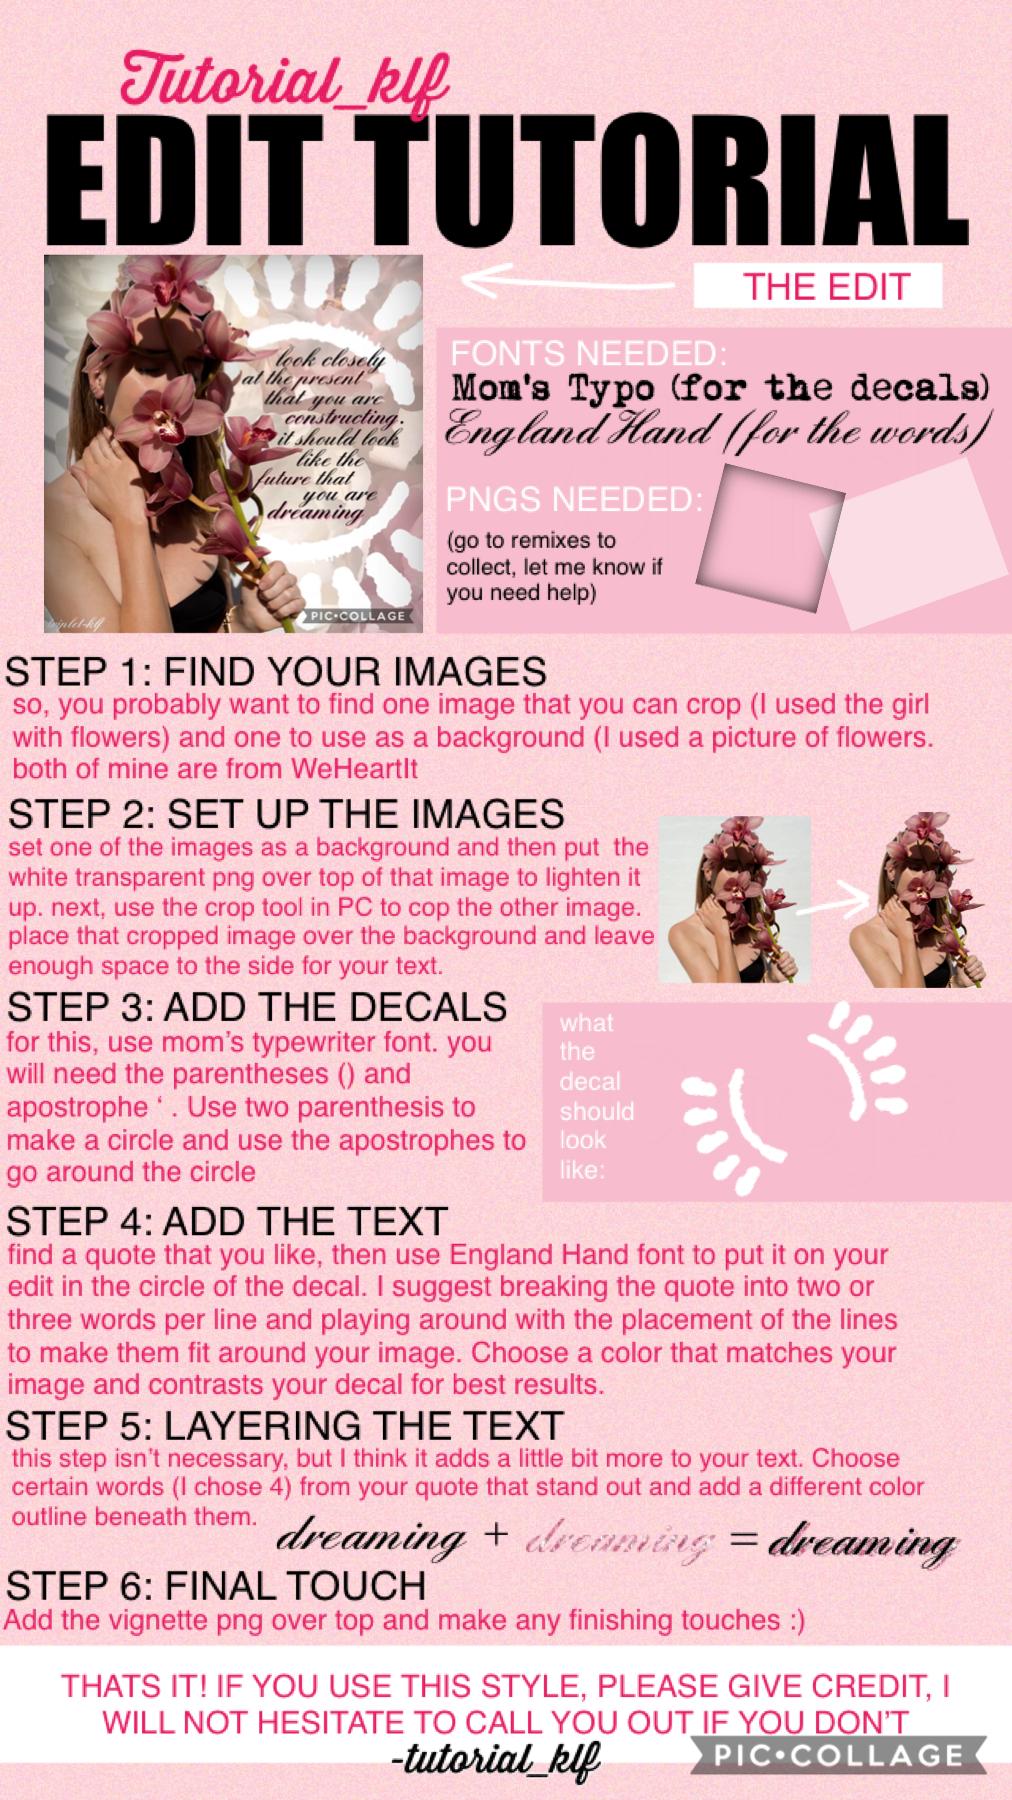 original edit @triplet-klf 💕 let me know if you have any questions! it’s been so long since I made a tutorial, hope you enjoy this one! 🌸 make sure to give credit!